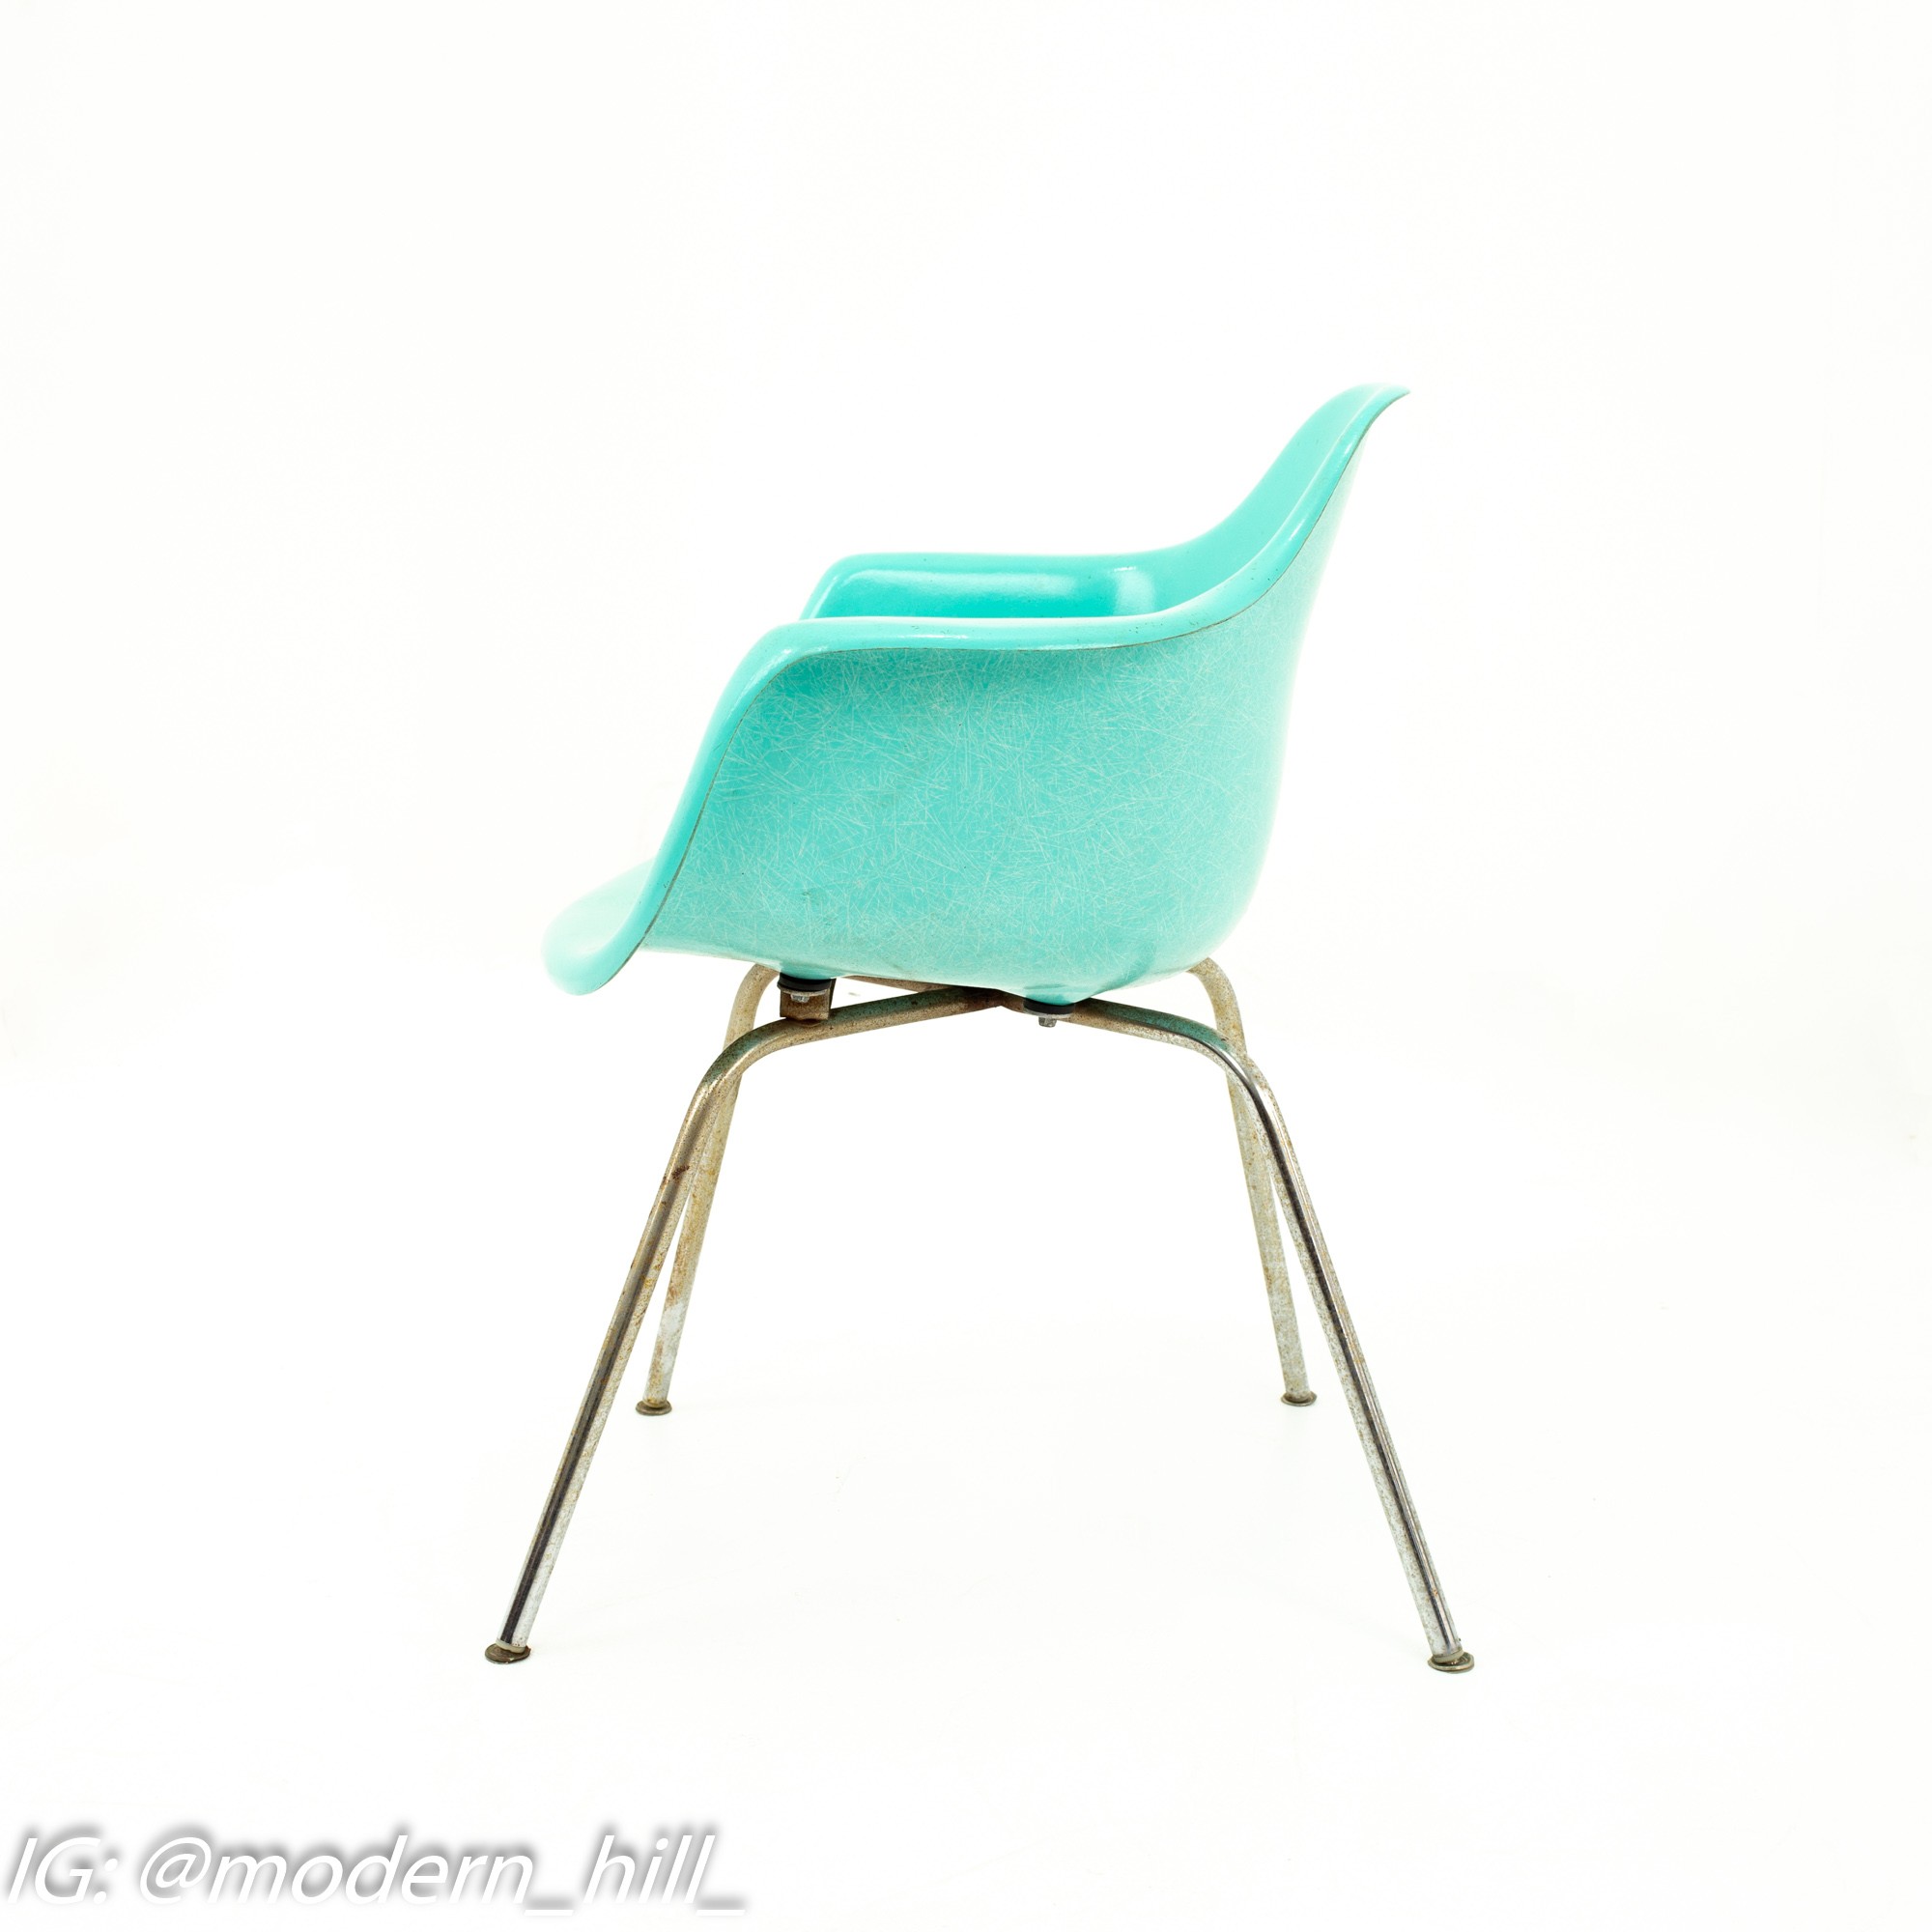 Eames Style Krueger Metal Products Mid Century Green Fiberglass Shell Chair